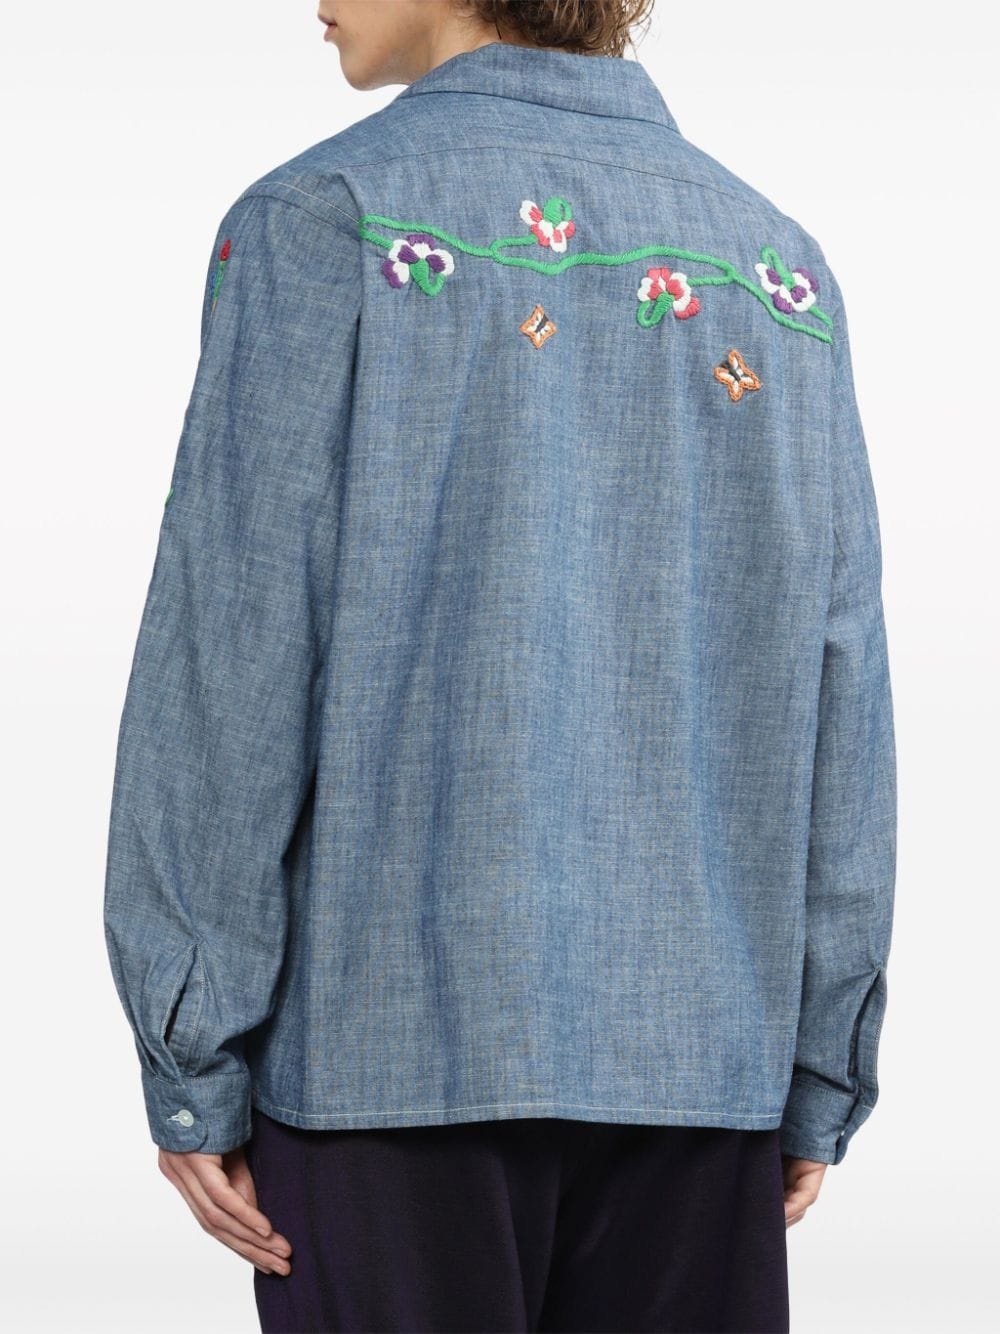 embroidered western shirt - 4